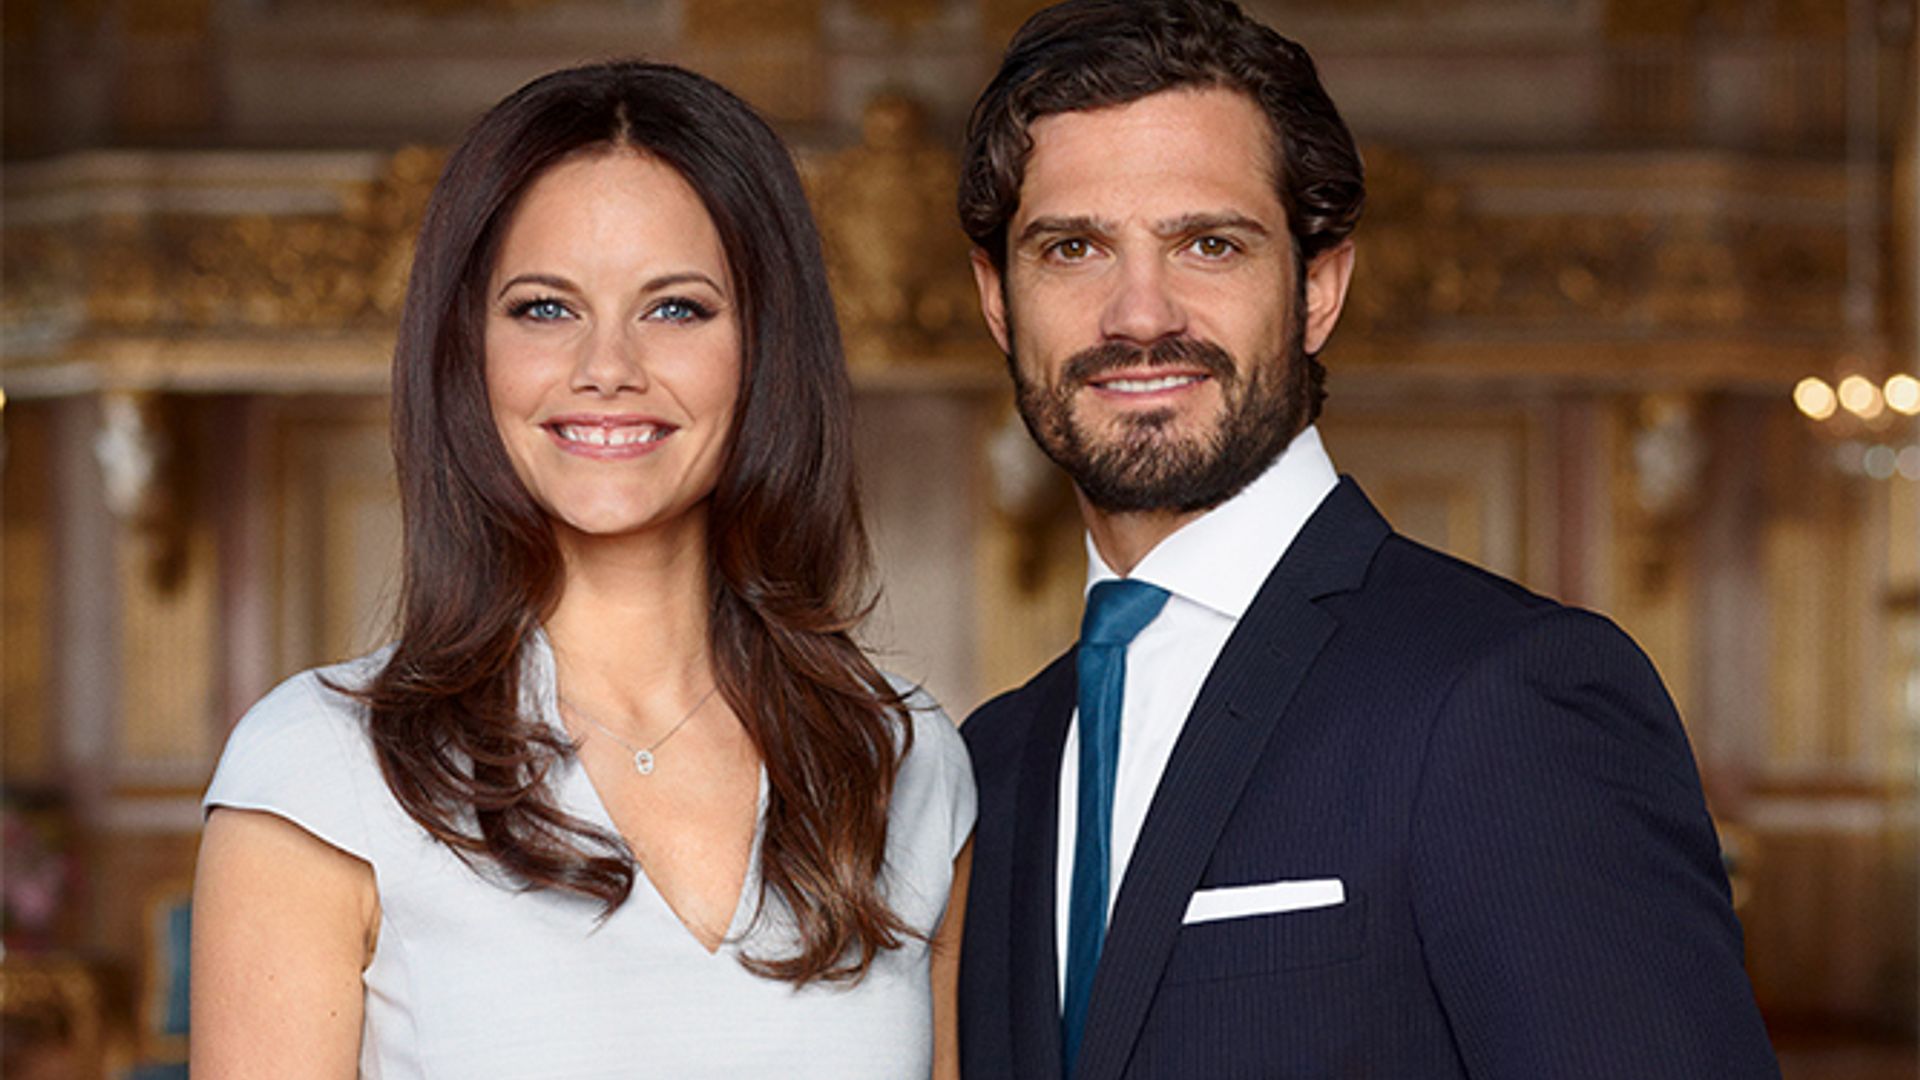 Sweden's Prince Carl Philip and Sofia Hellqvist share special wedding request